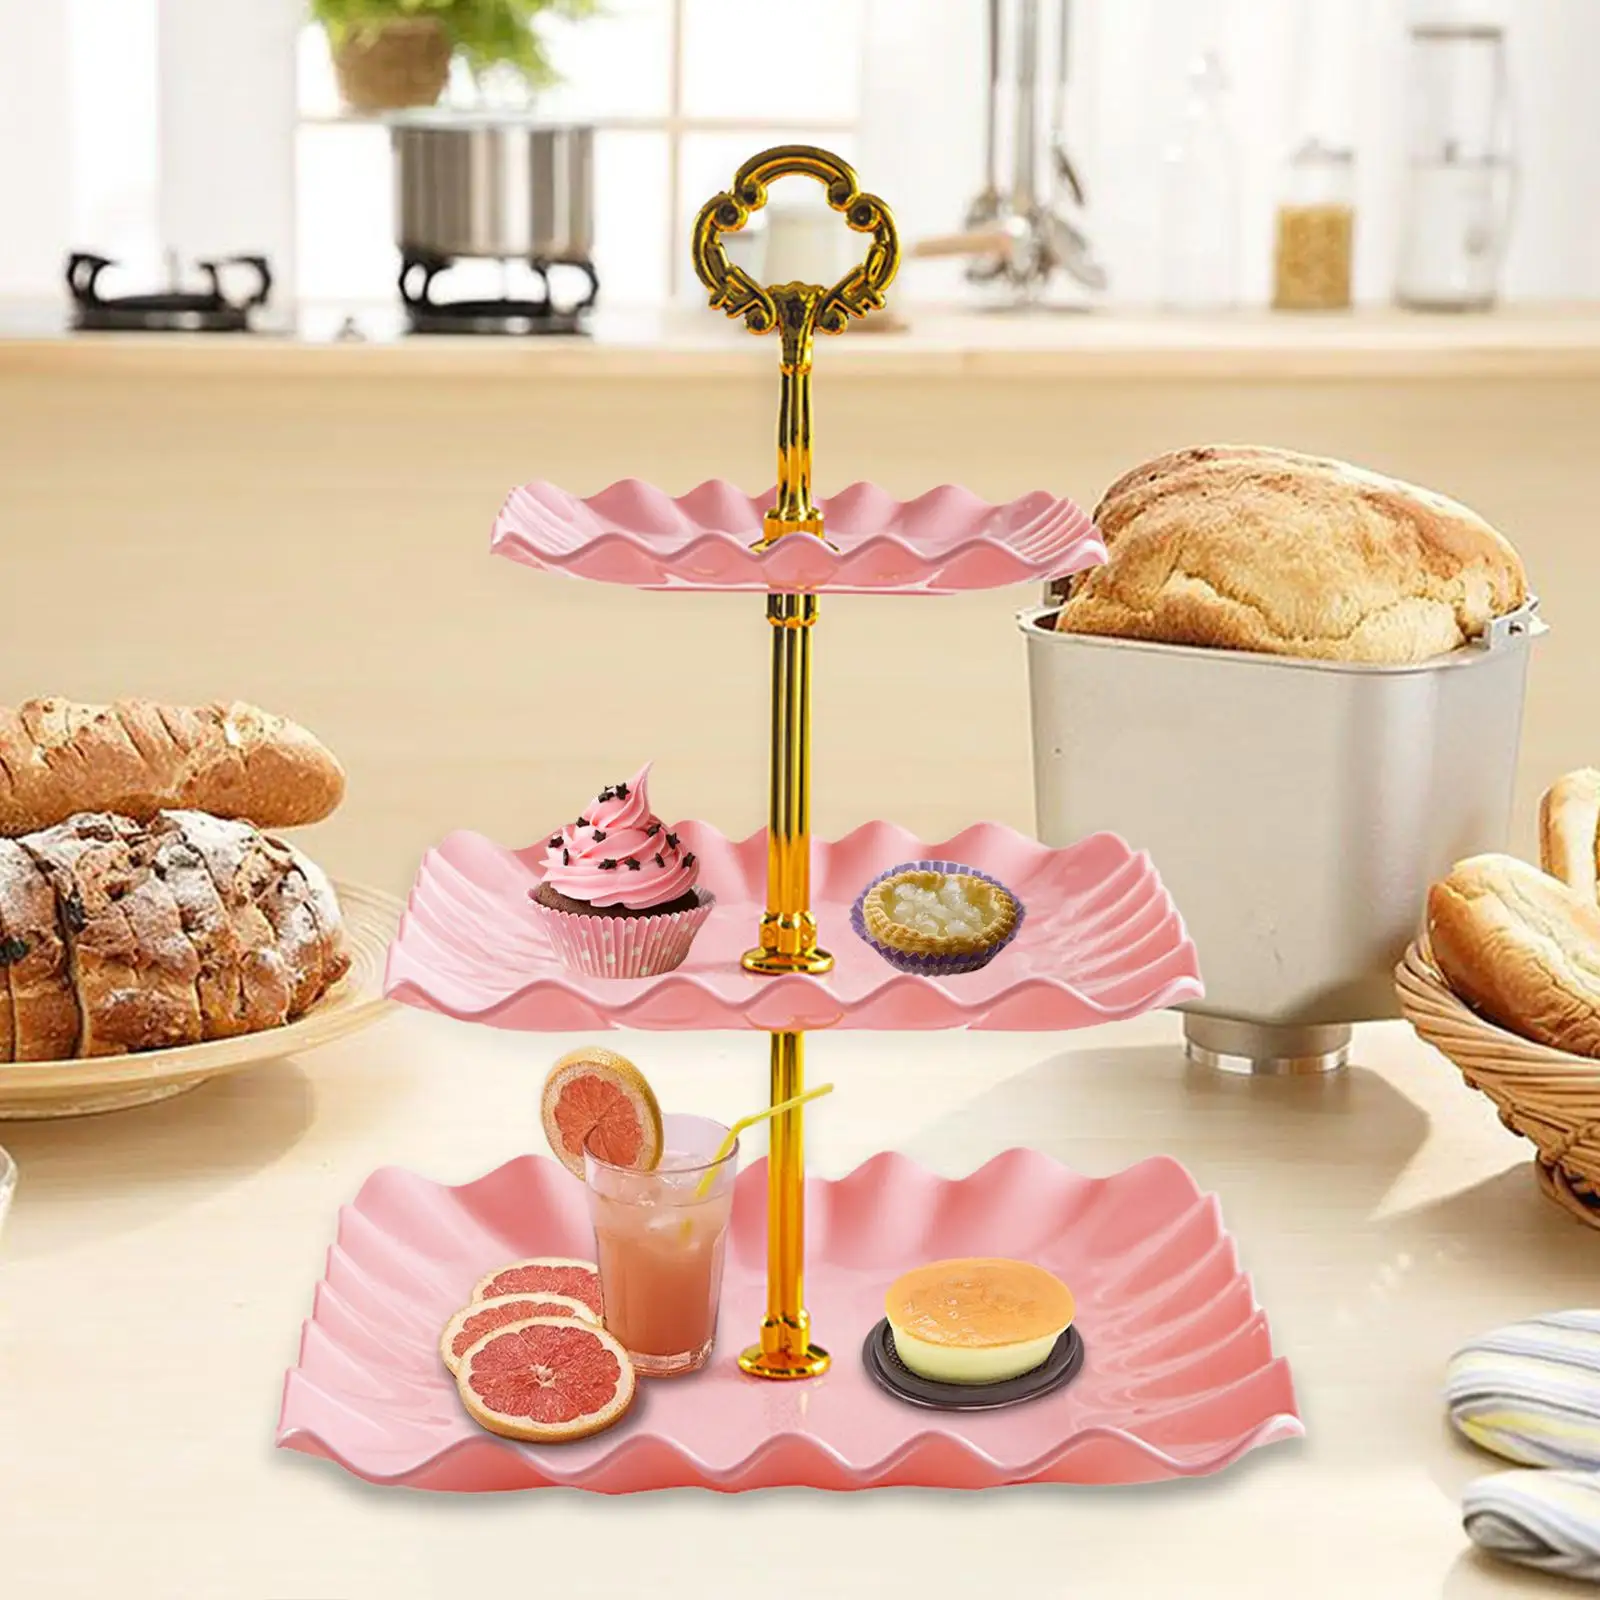 Cupcake Stand 3 Tier with Handle Dessert Stand for Party Celebration Wedding